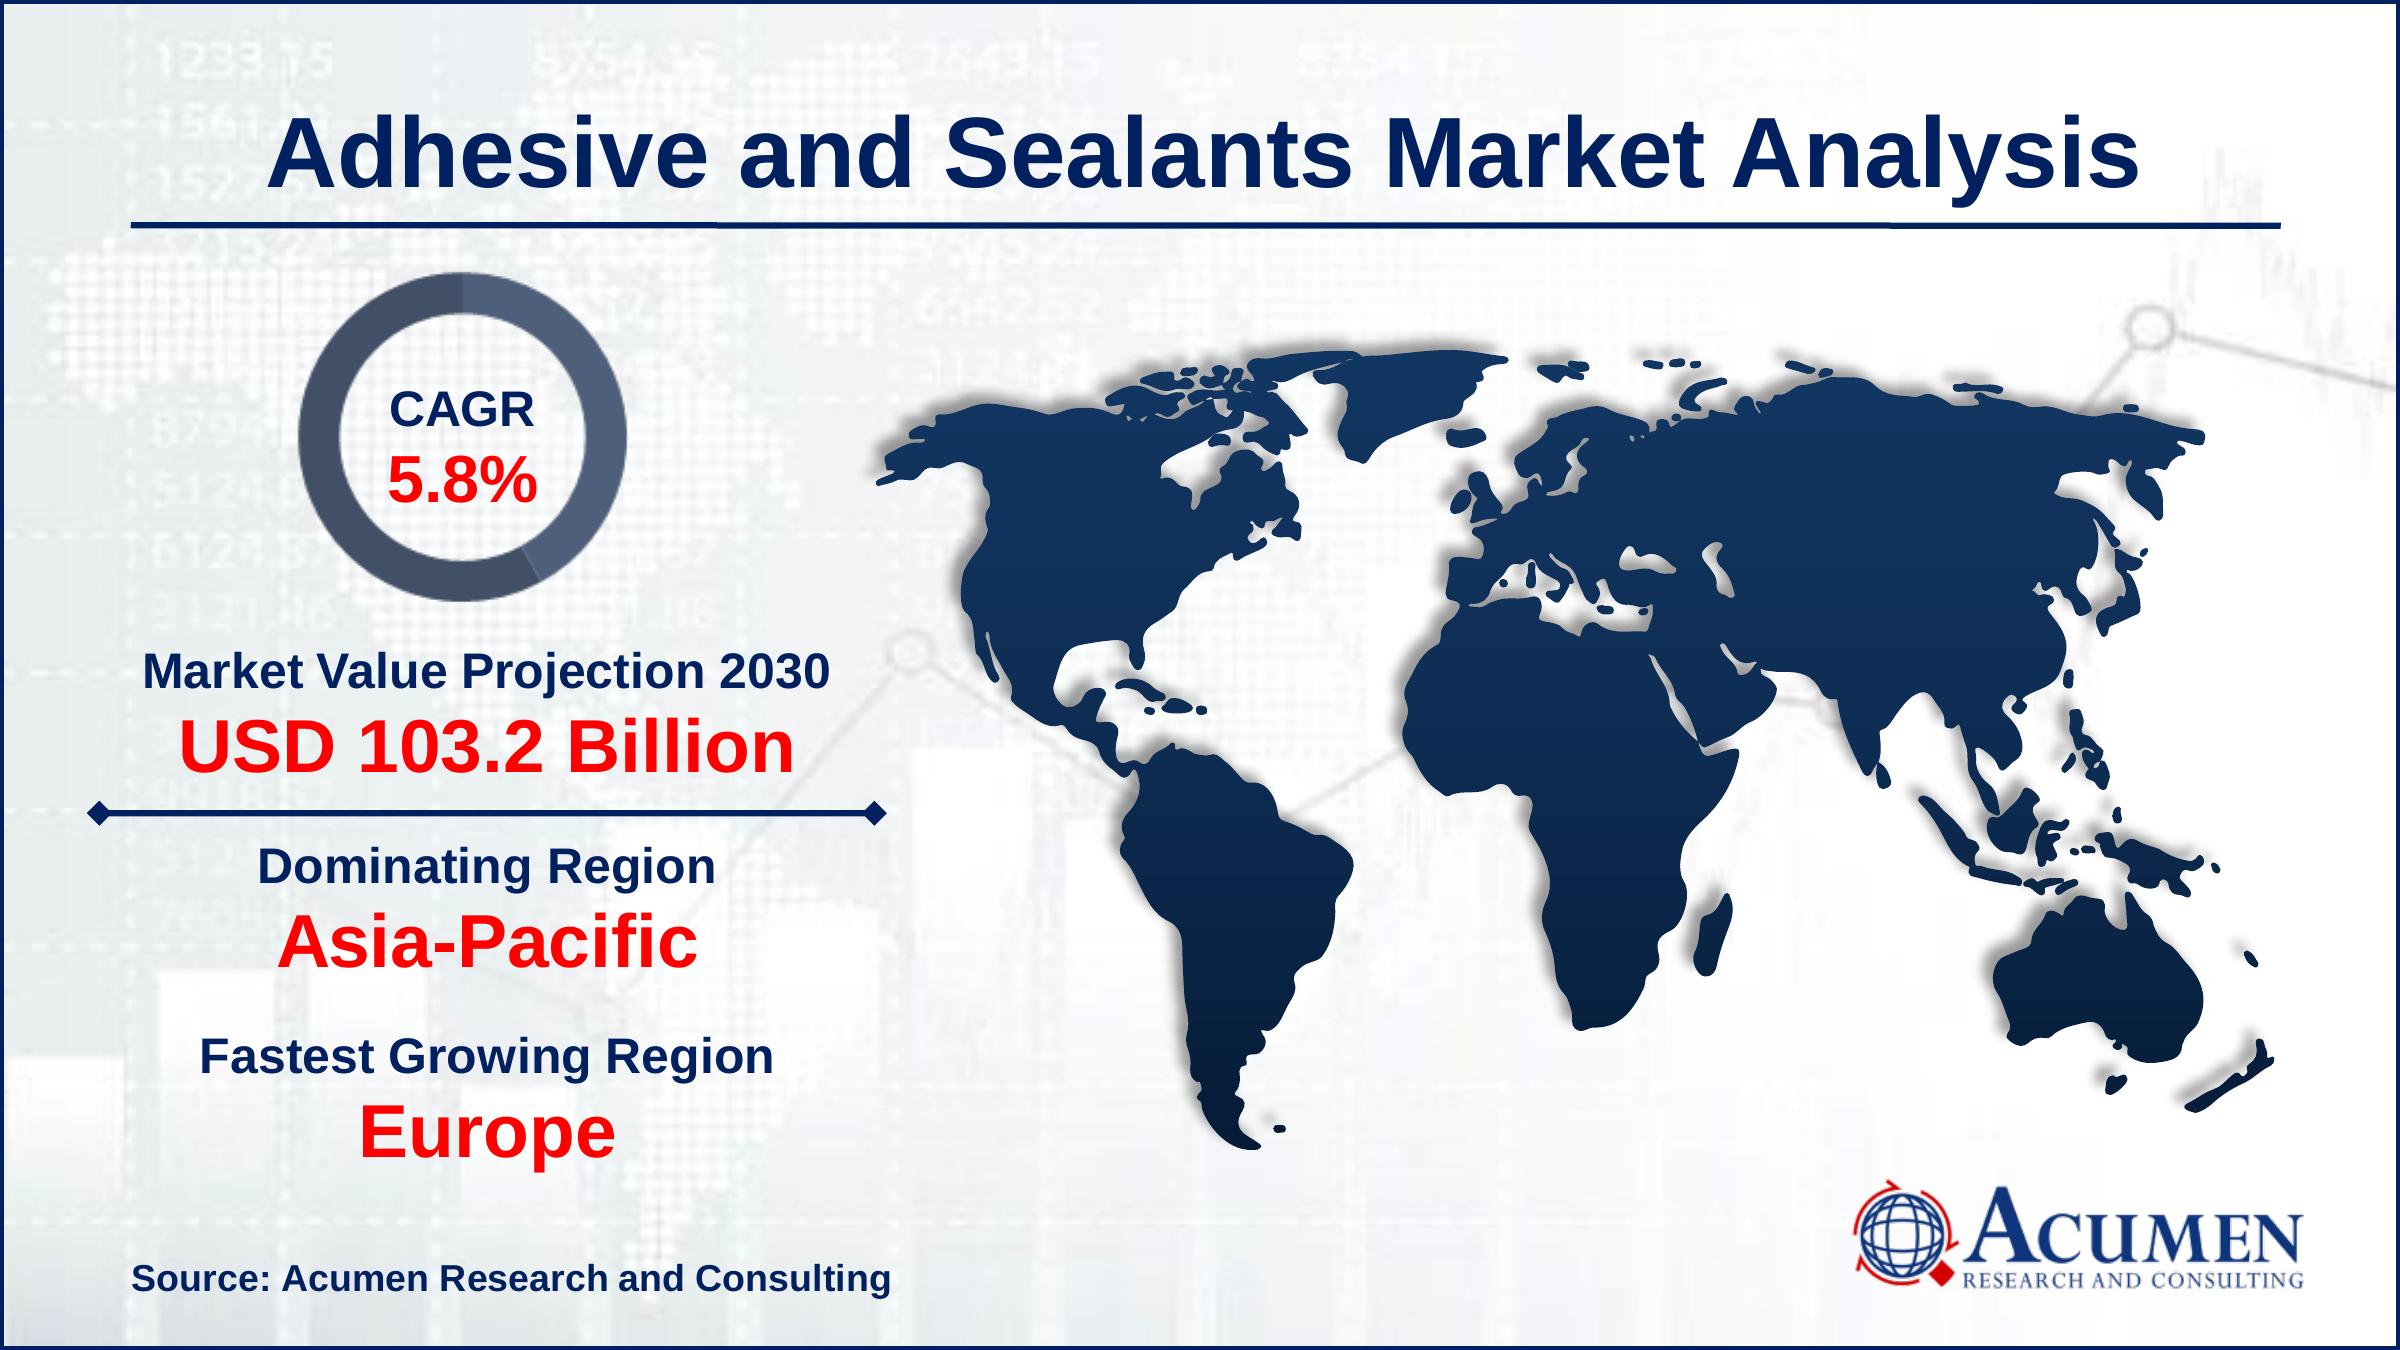 Europe regional market is expected to grow at a CAGR of more than 6% during the forecast period